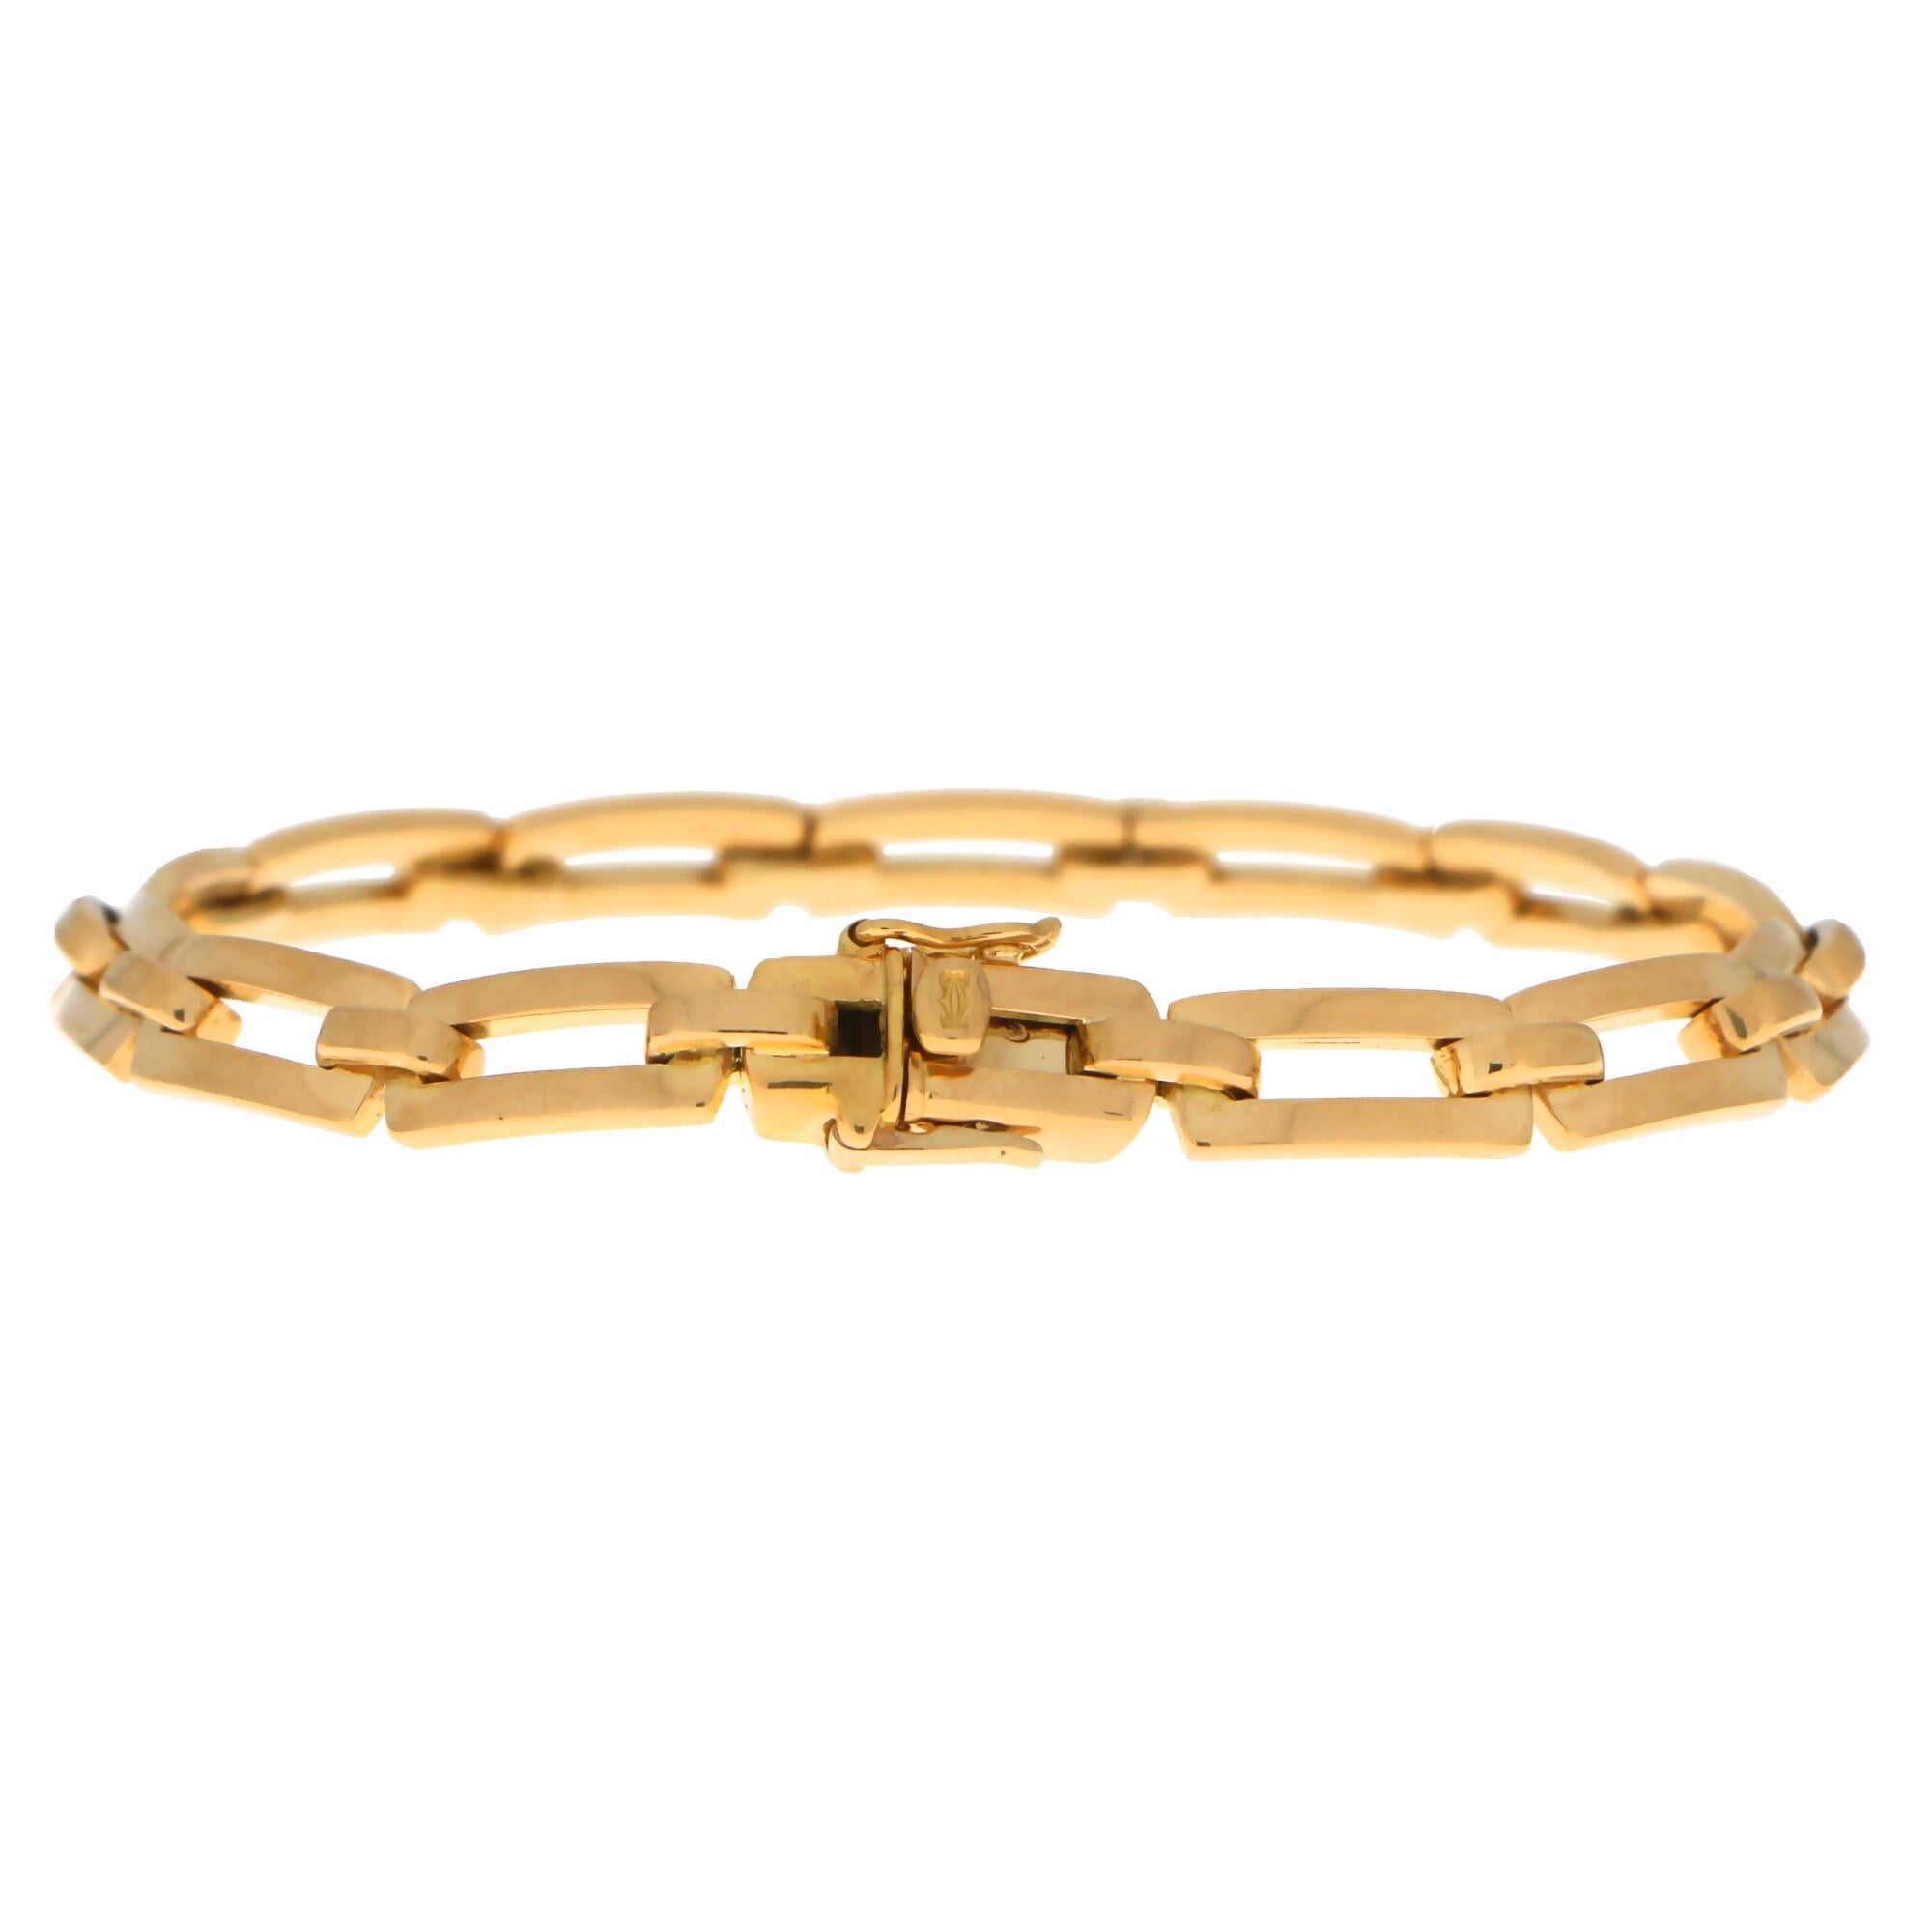 A simple yet incredibly beautiful Cartier chain link bracelet made of solid 18k yellow gold.

The bracelet is composed of 13 rectangular links and sits beautifully on the wrist. Due to the design of the bracelet it could easily be worn by itself as